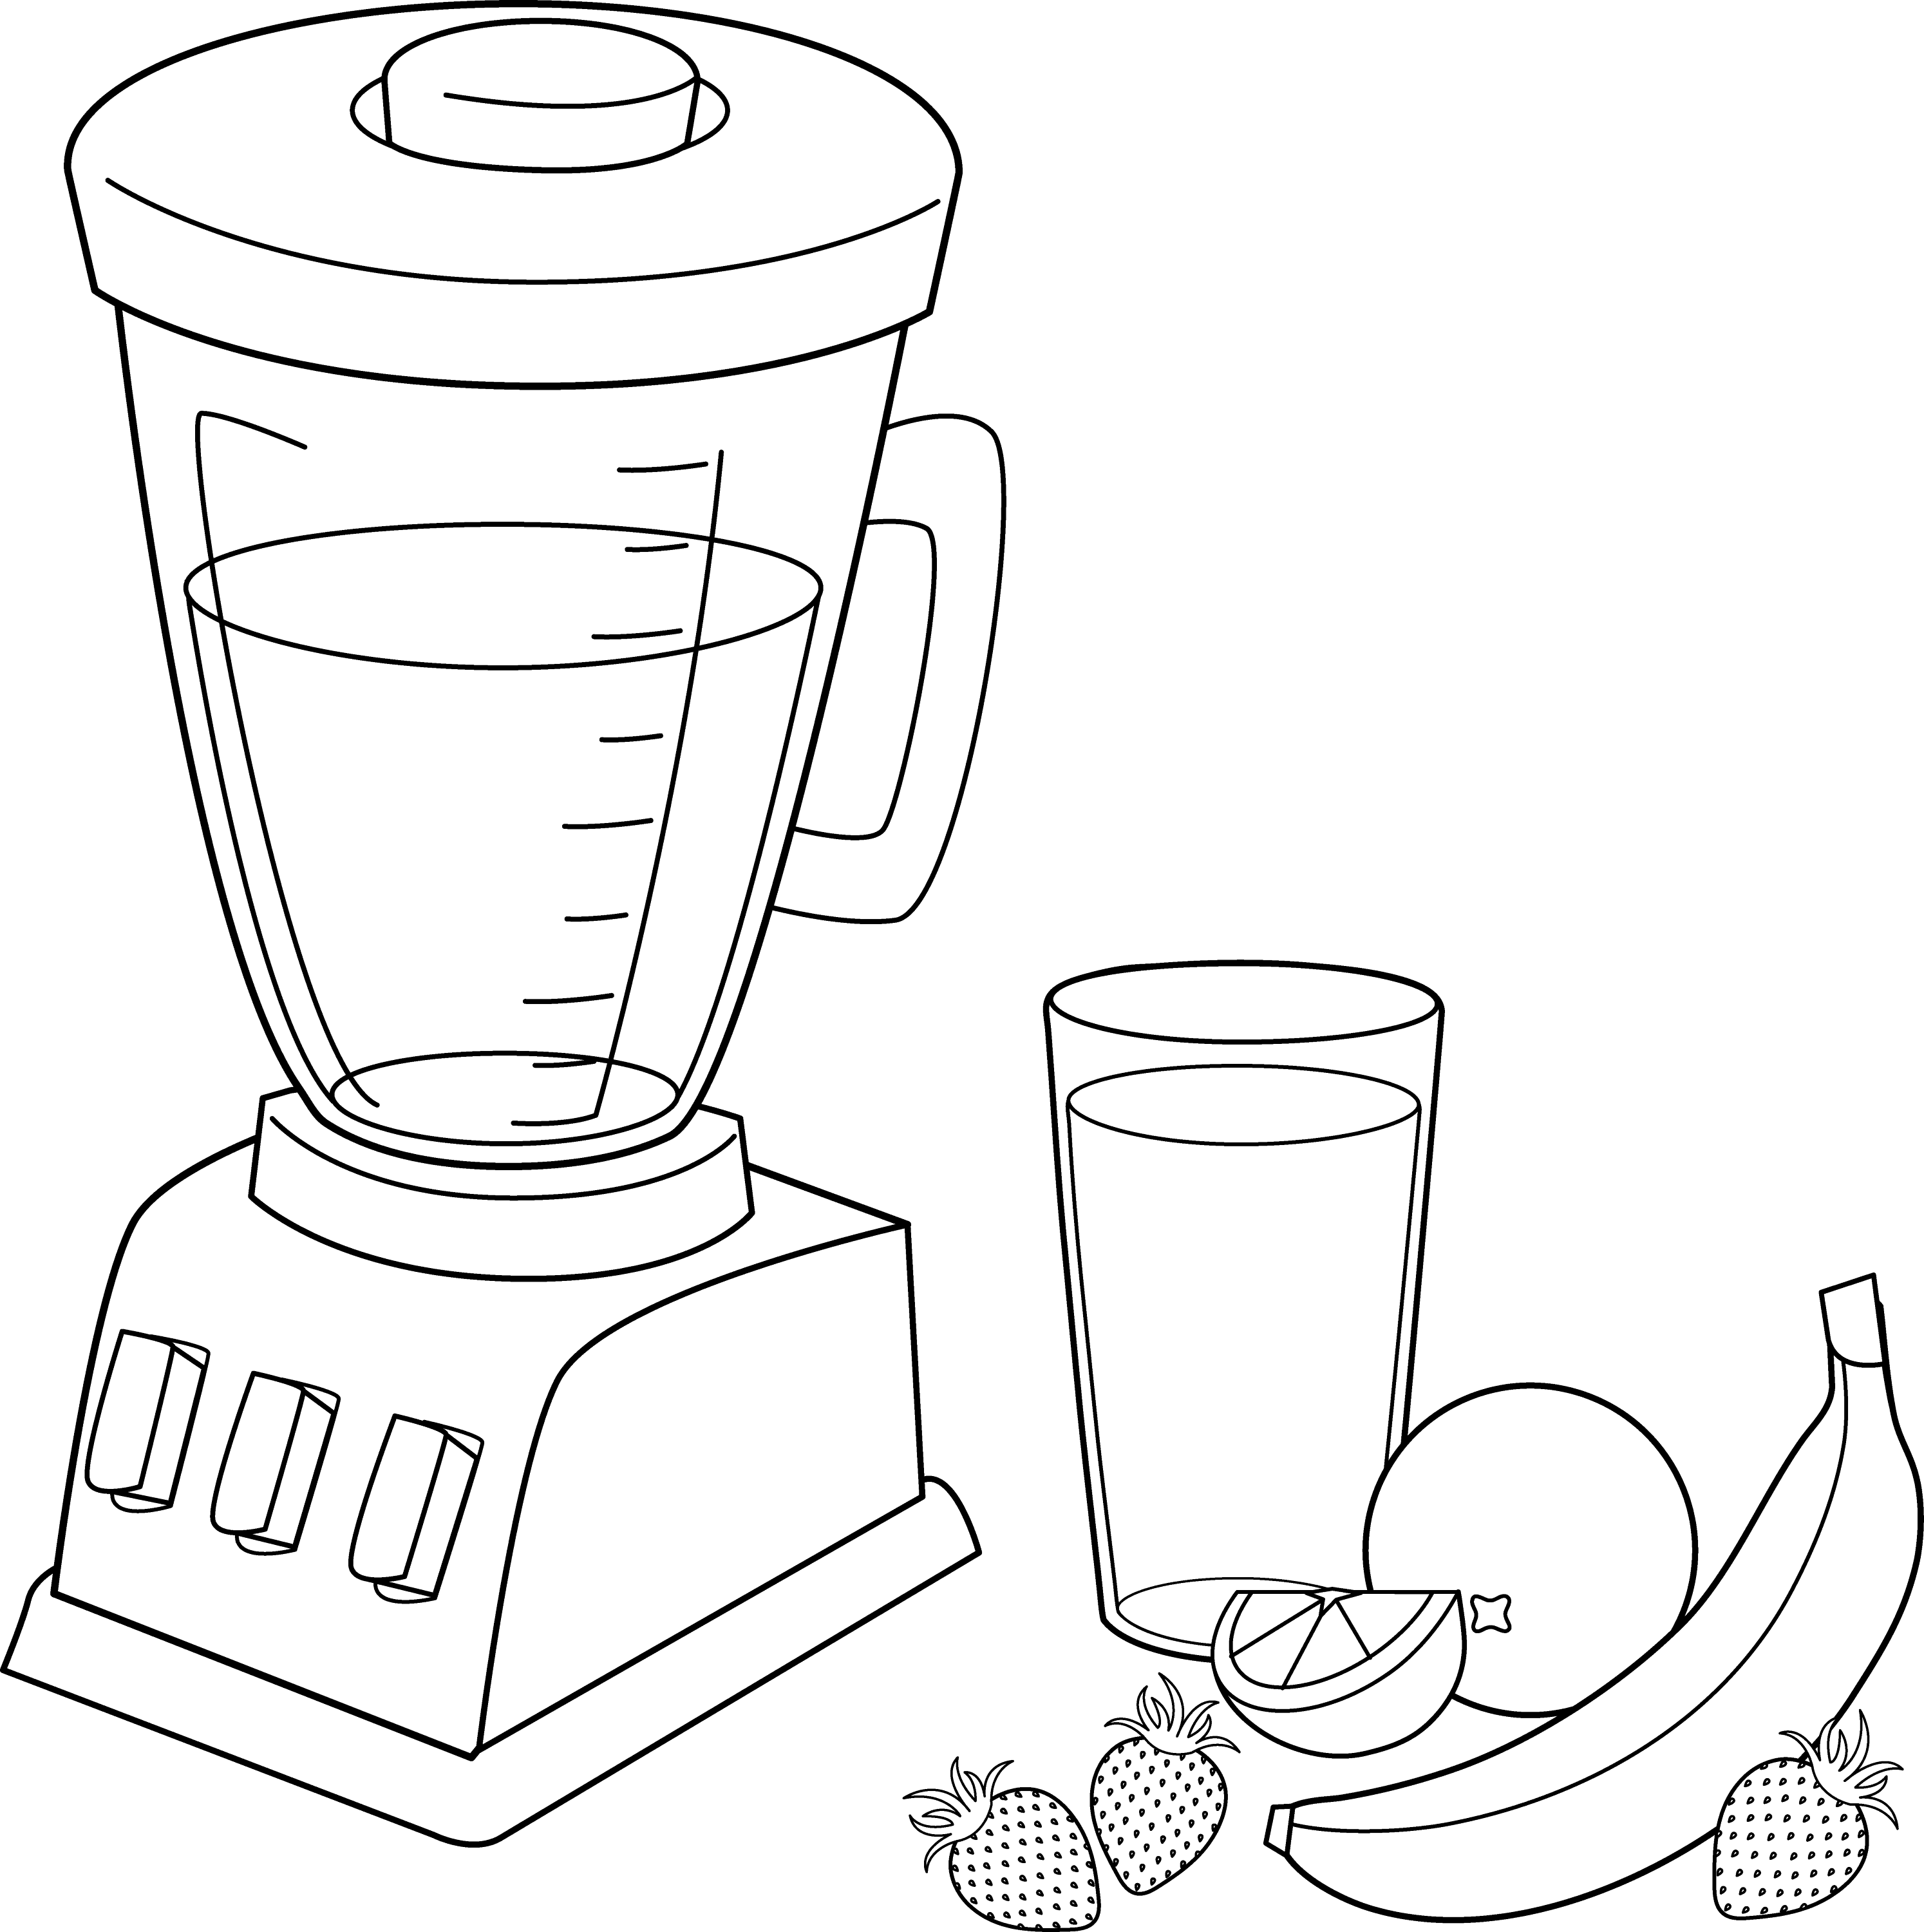 Fruit Smoothies Coloring Page Free Clip Art